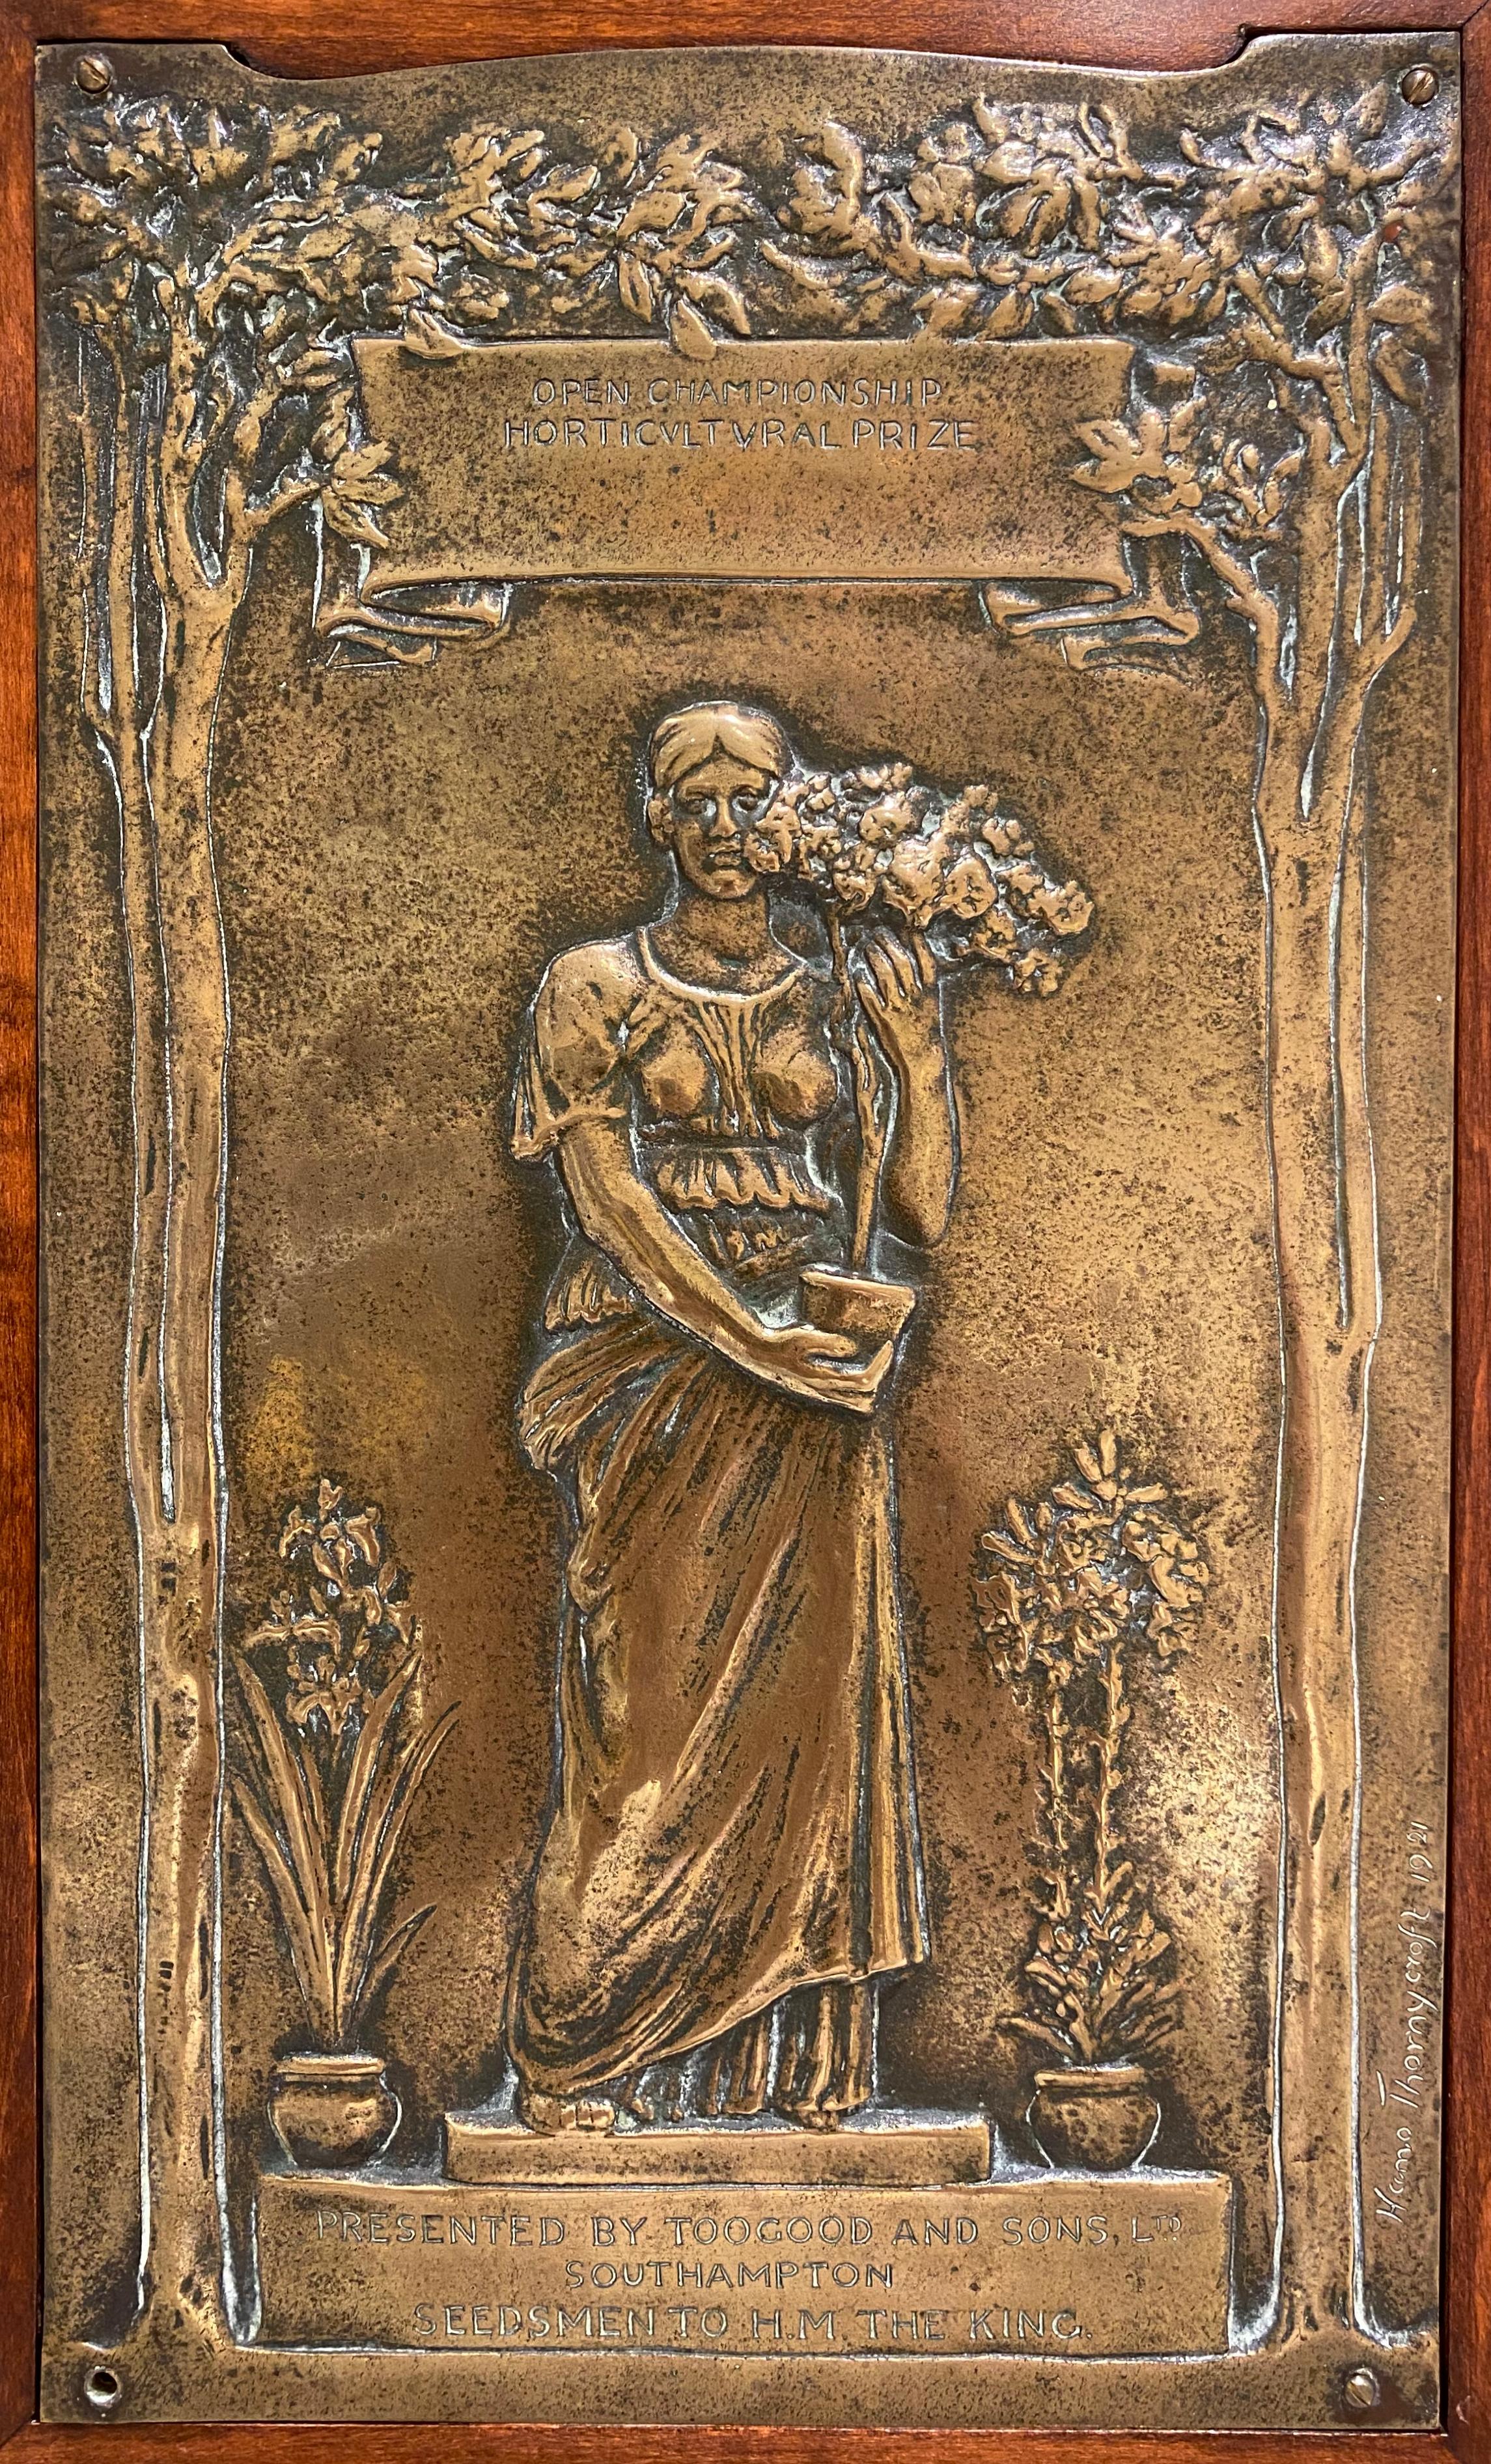  Horticulture, Garden Prize relief wall hanging - Sculpture by Sir William H. Thornycroft